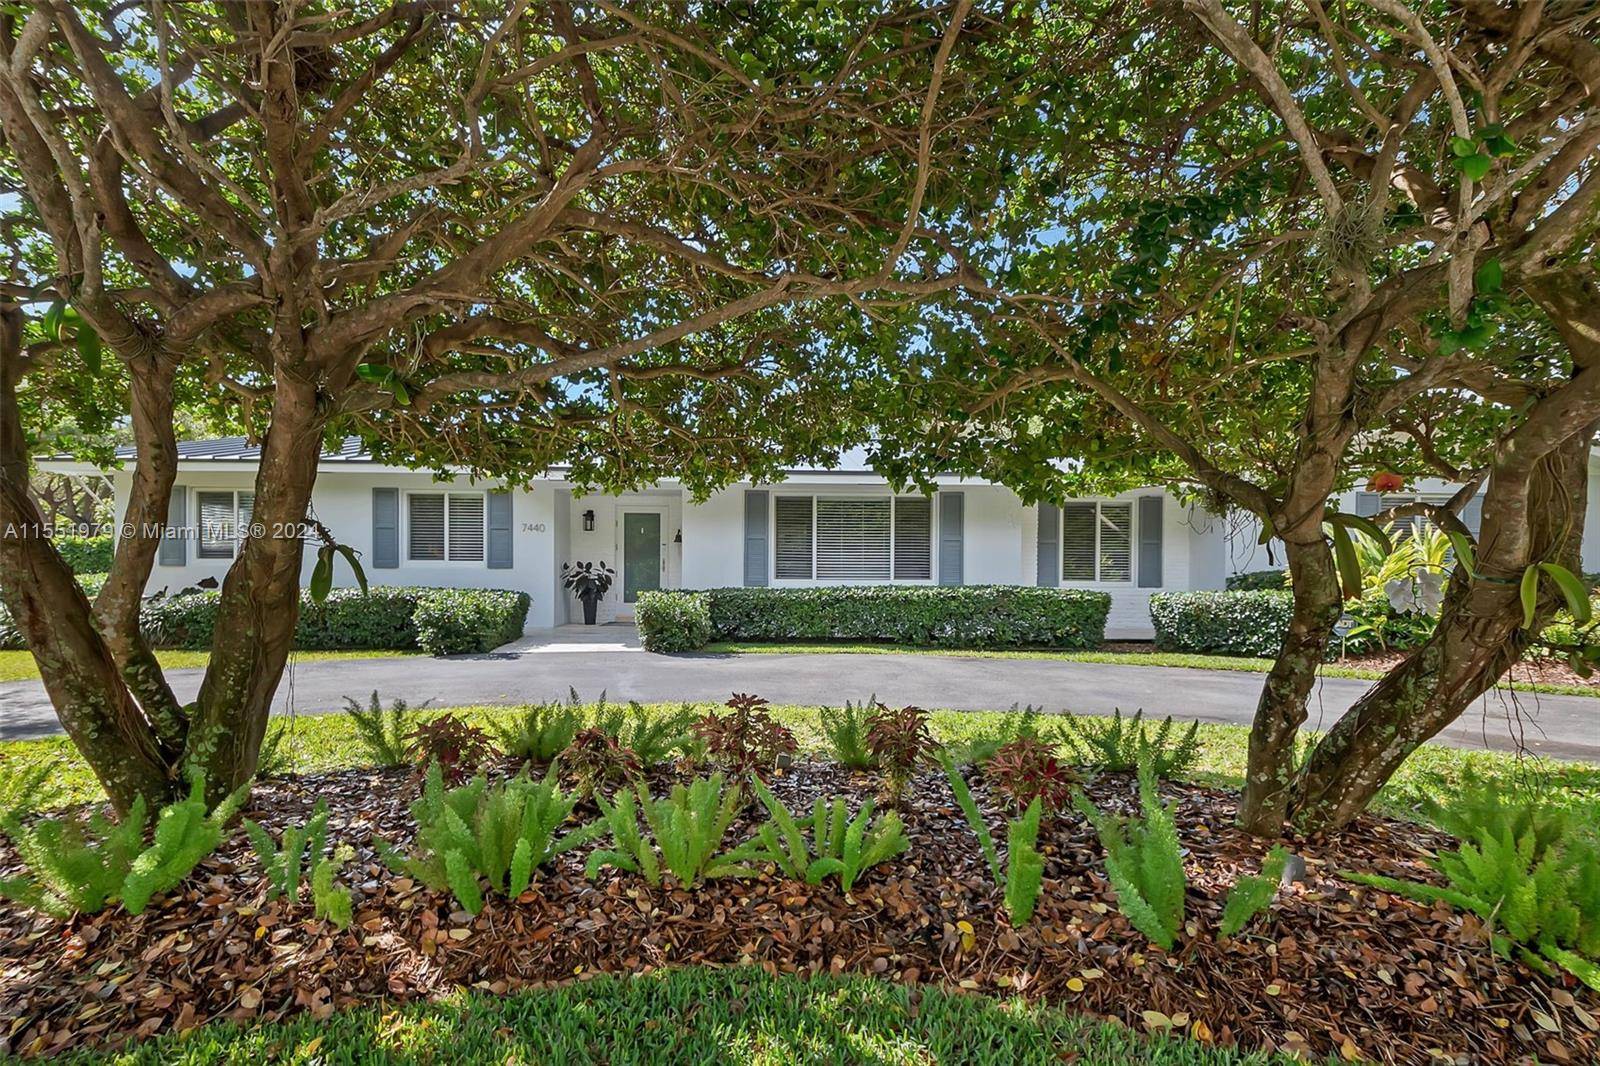 Pristine 4 2 home with detached 2018 built one bedroom cottage retreat in one of Palmetto Bay s most desirable neighborhoods.